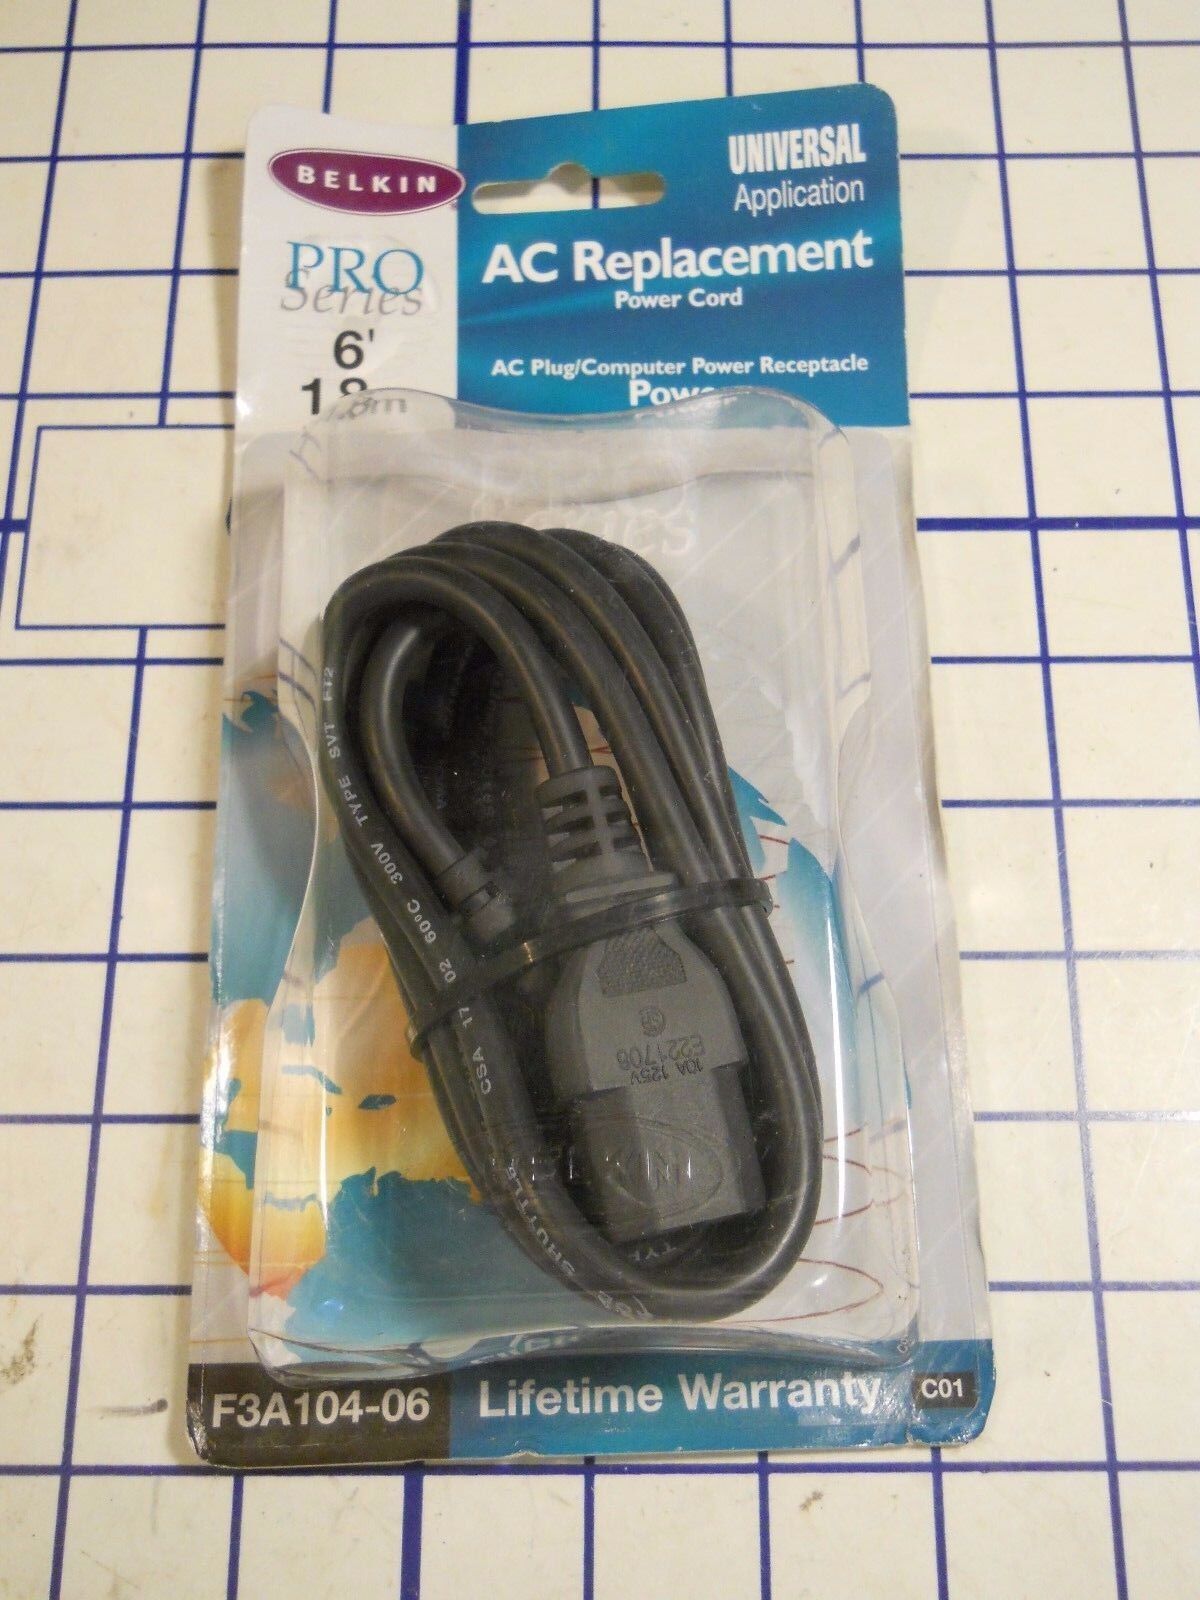 BELKIN F3A104-06 PRO SERIES 6-FOOT 1.8m UNIVERSAL AC REPLACEMENT POWER CORD